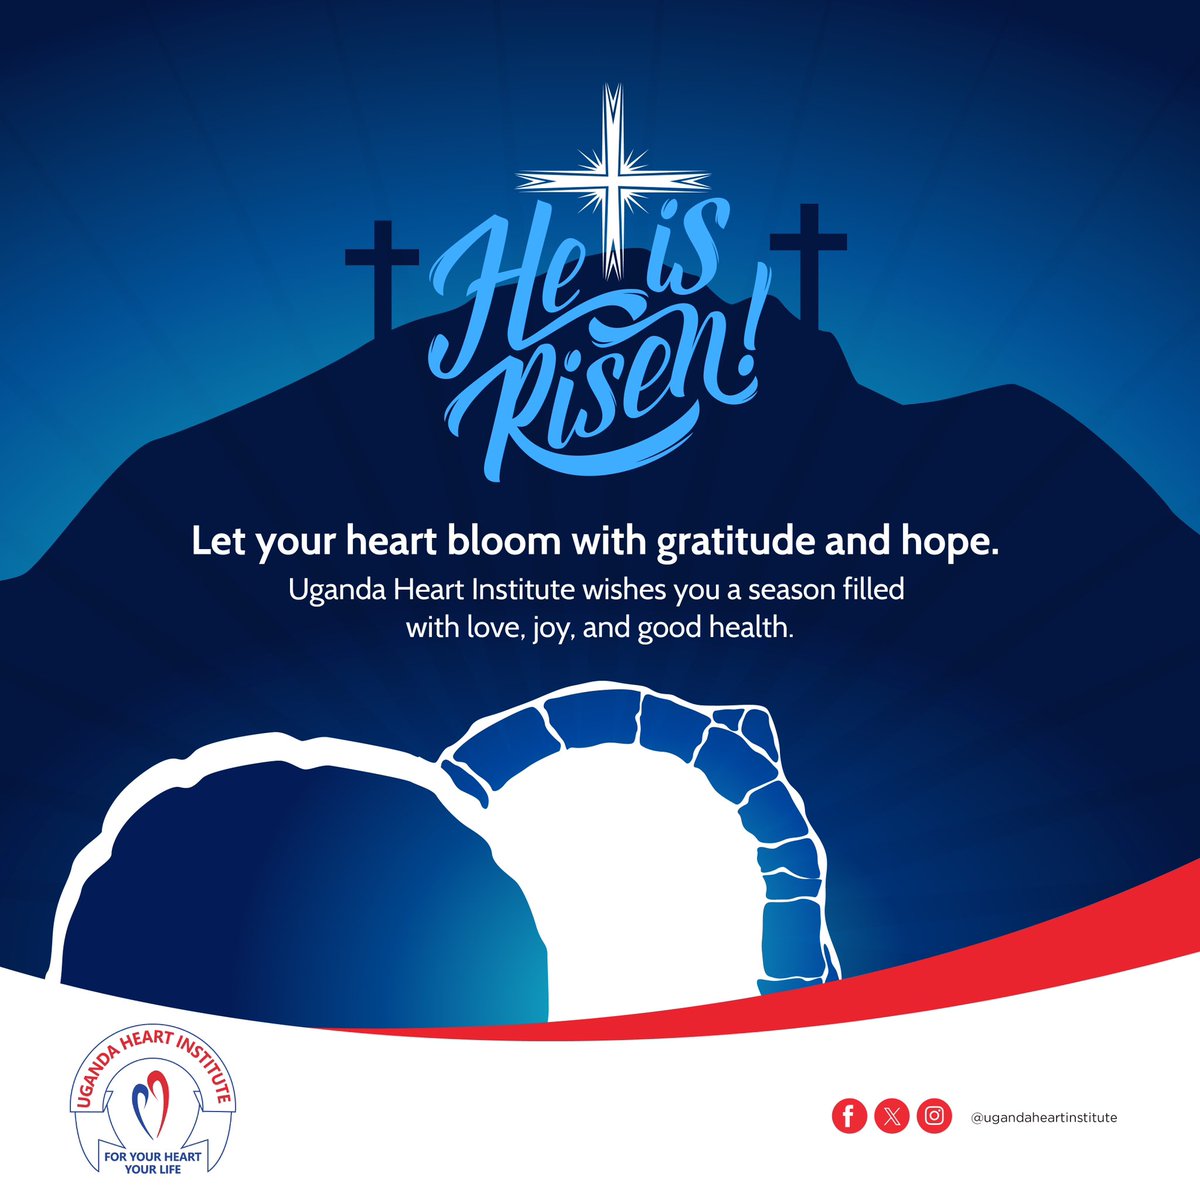 May your heart overflow with gratitude and hope this season, embracing love, joy, and good health. Wishing you Easter blessings from Uganda Heart Institute.